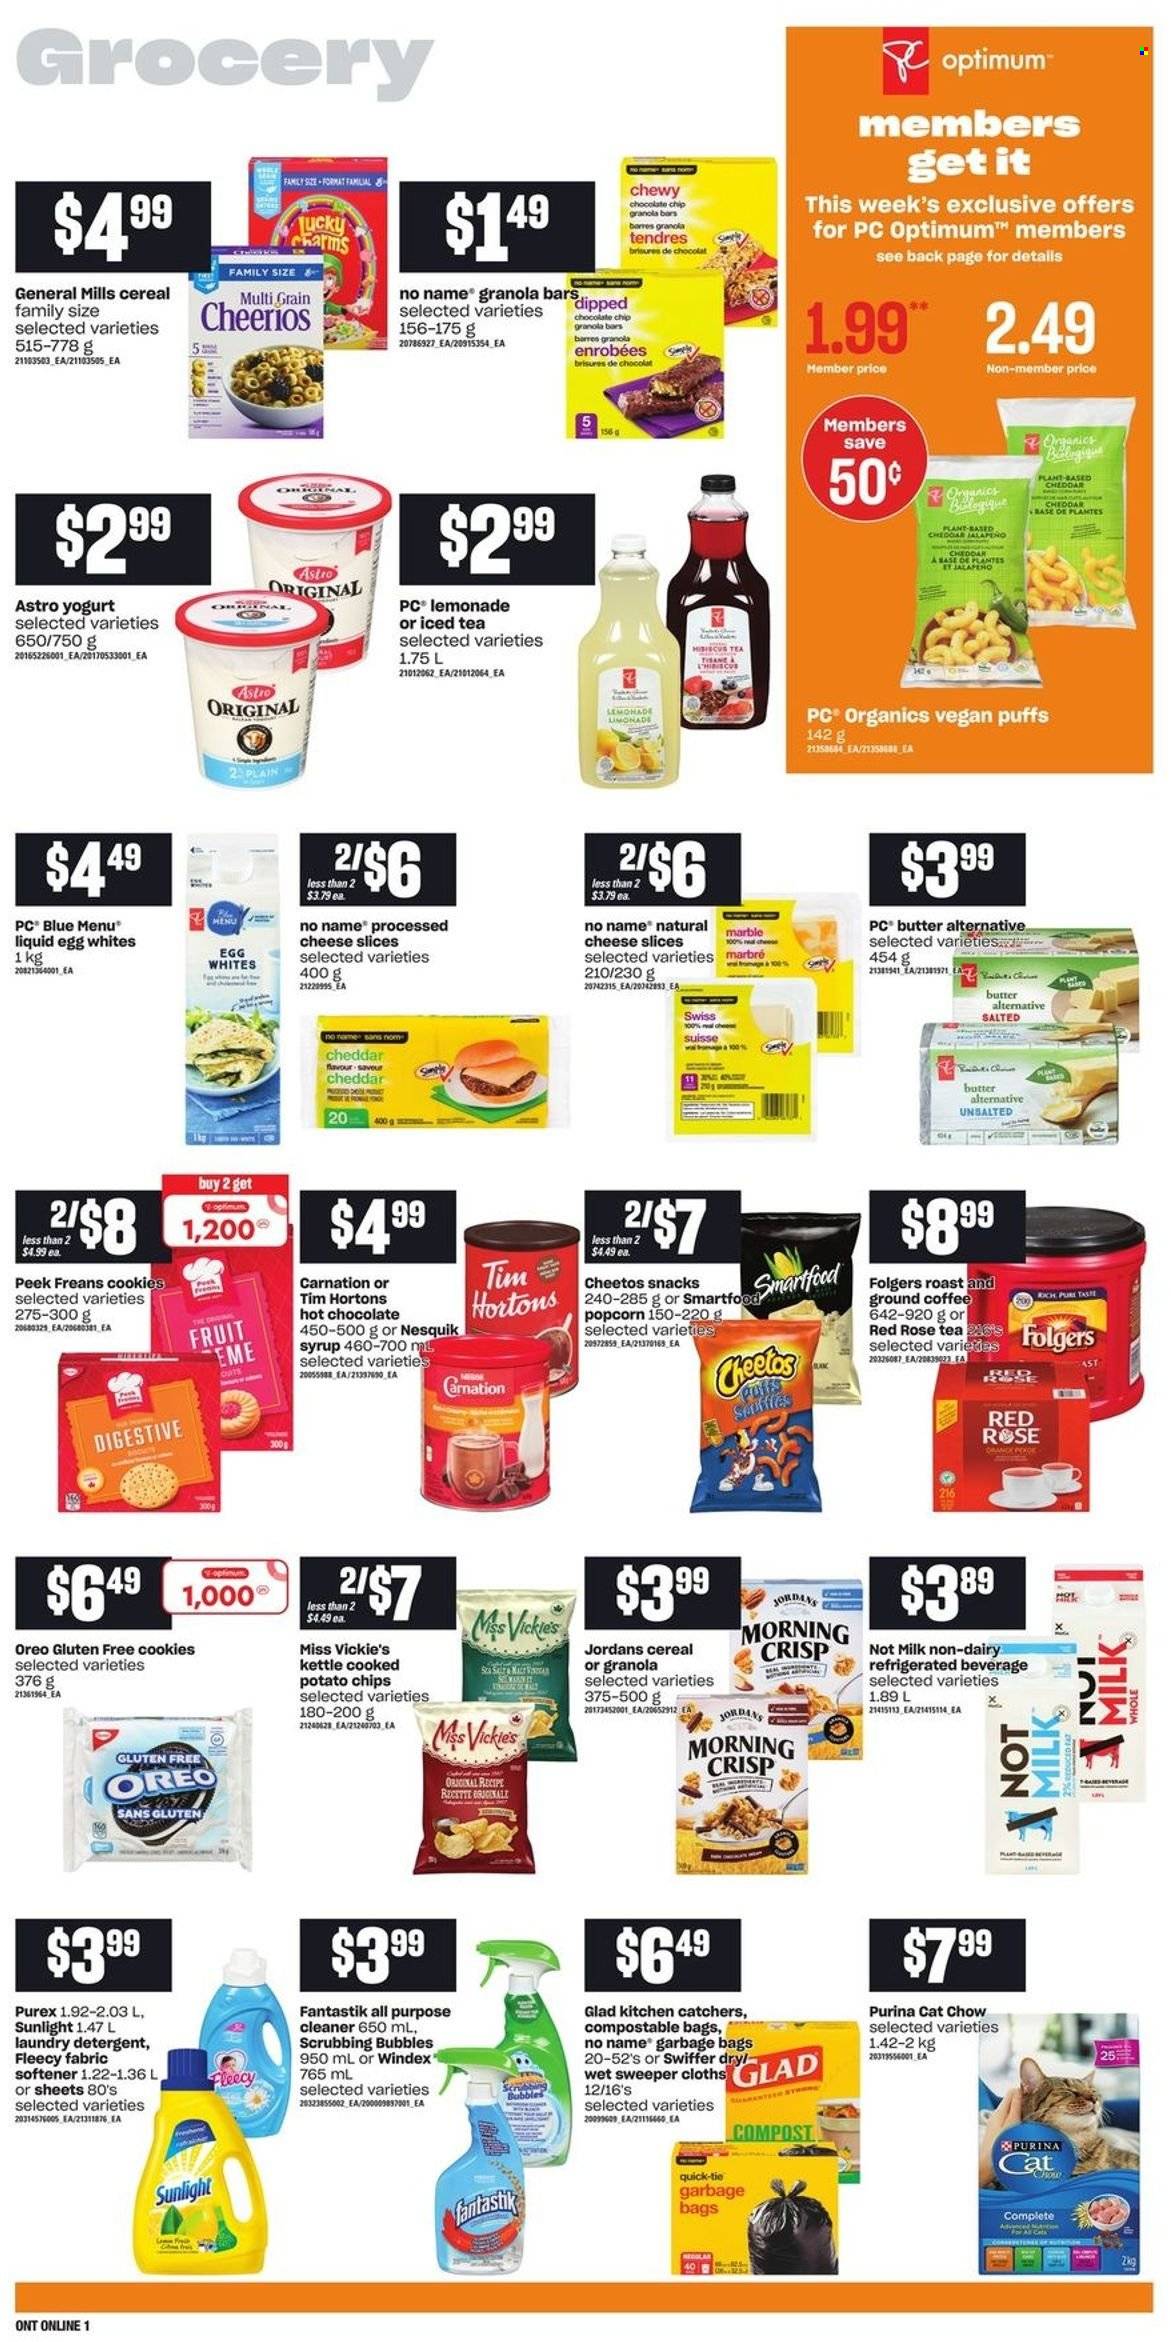 thumbnail - Loblaws Flyer - January 13, 2022 - January 19, 2022 - Sales products - puffs, jalapeño, No Name, sliced cheese, cheese, yoghurt, milk, eggs, butter, cookies, snack, Digestive, potato chips, Cheetos, Smartfood, popcorn, cereals, Cheerios, granola bar, syrup, lemonade, ice tea, hot chocolate, coffee, Folgers, ground coffee, wine, rosé wine, Windex, Scrubbing Bubbles, cleaner, all purpose cleaner, Swiffer, fabric softener, laundry detergent, Sunlight, Purex, bag, Purina, Optimum, Oreo, Nesquik, detergent, chips. Page 5.